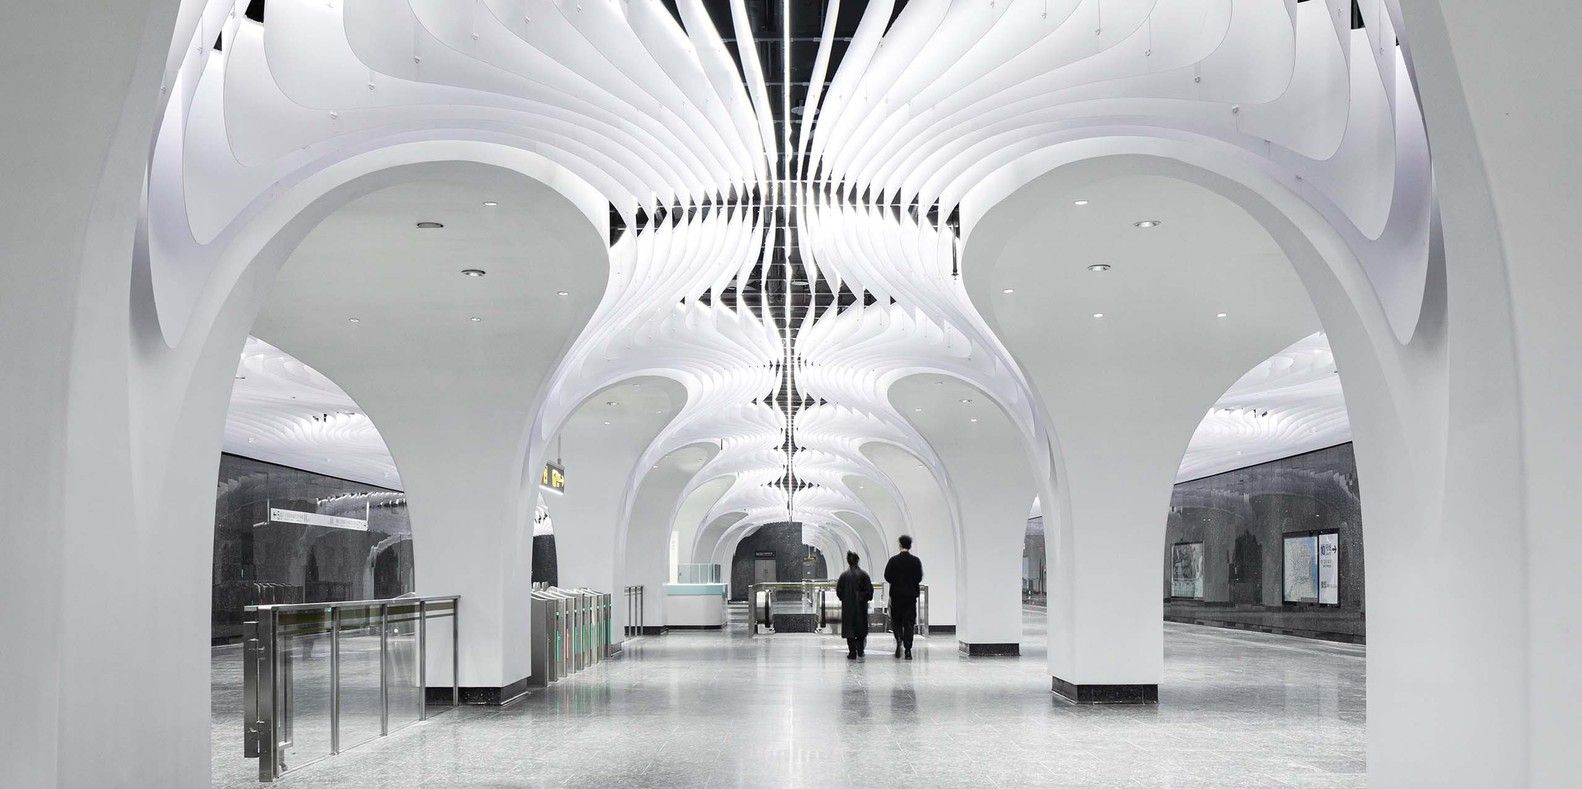 the white parametric ceiling at Yuyuan station